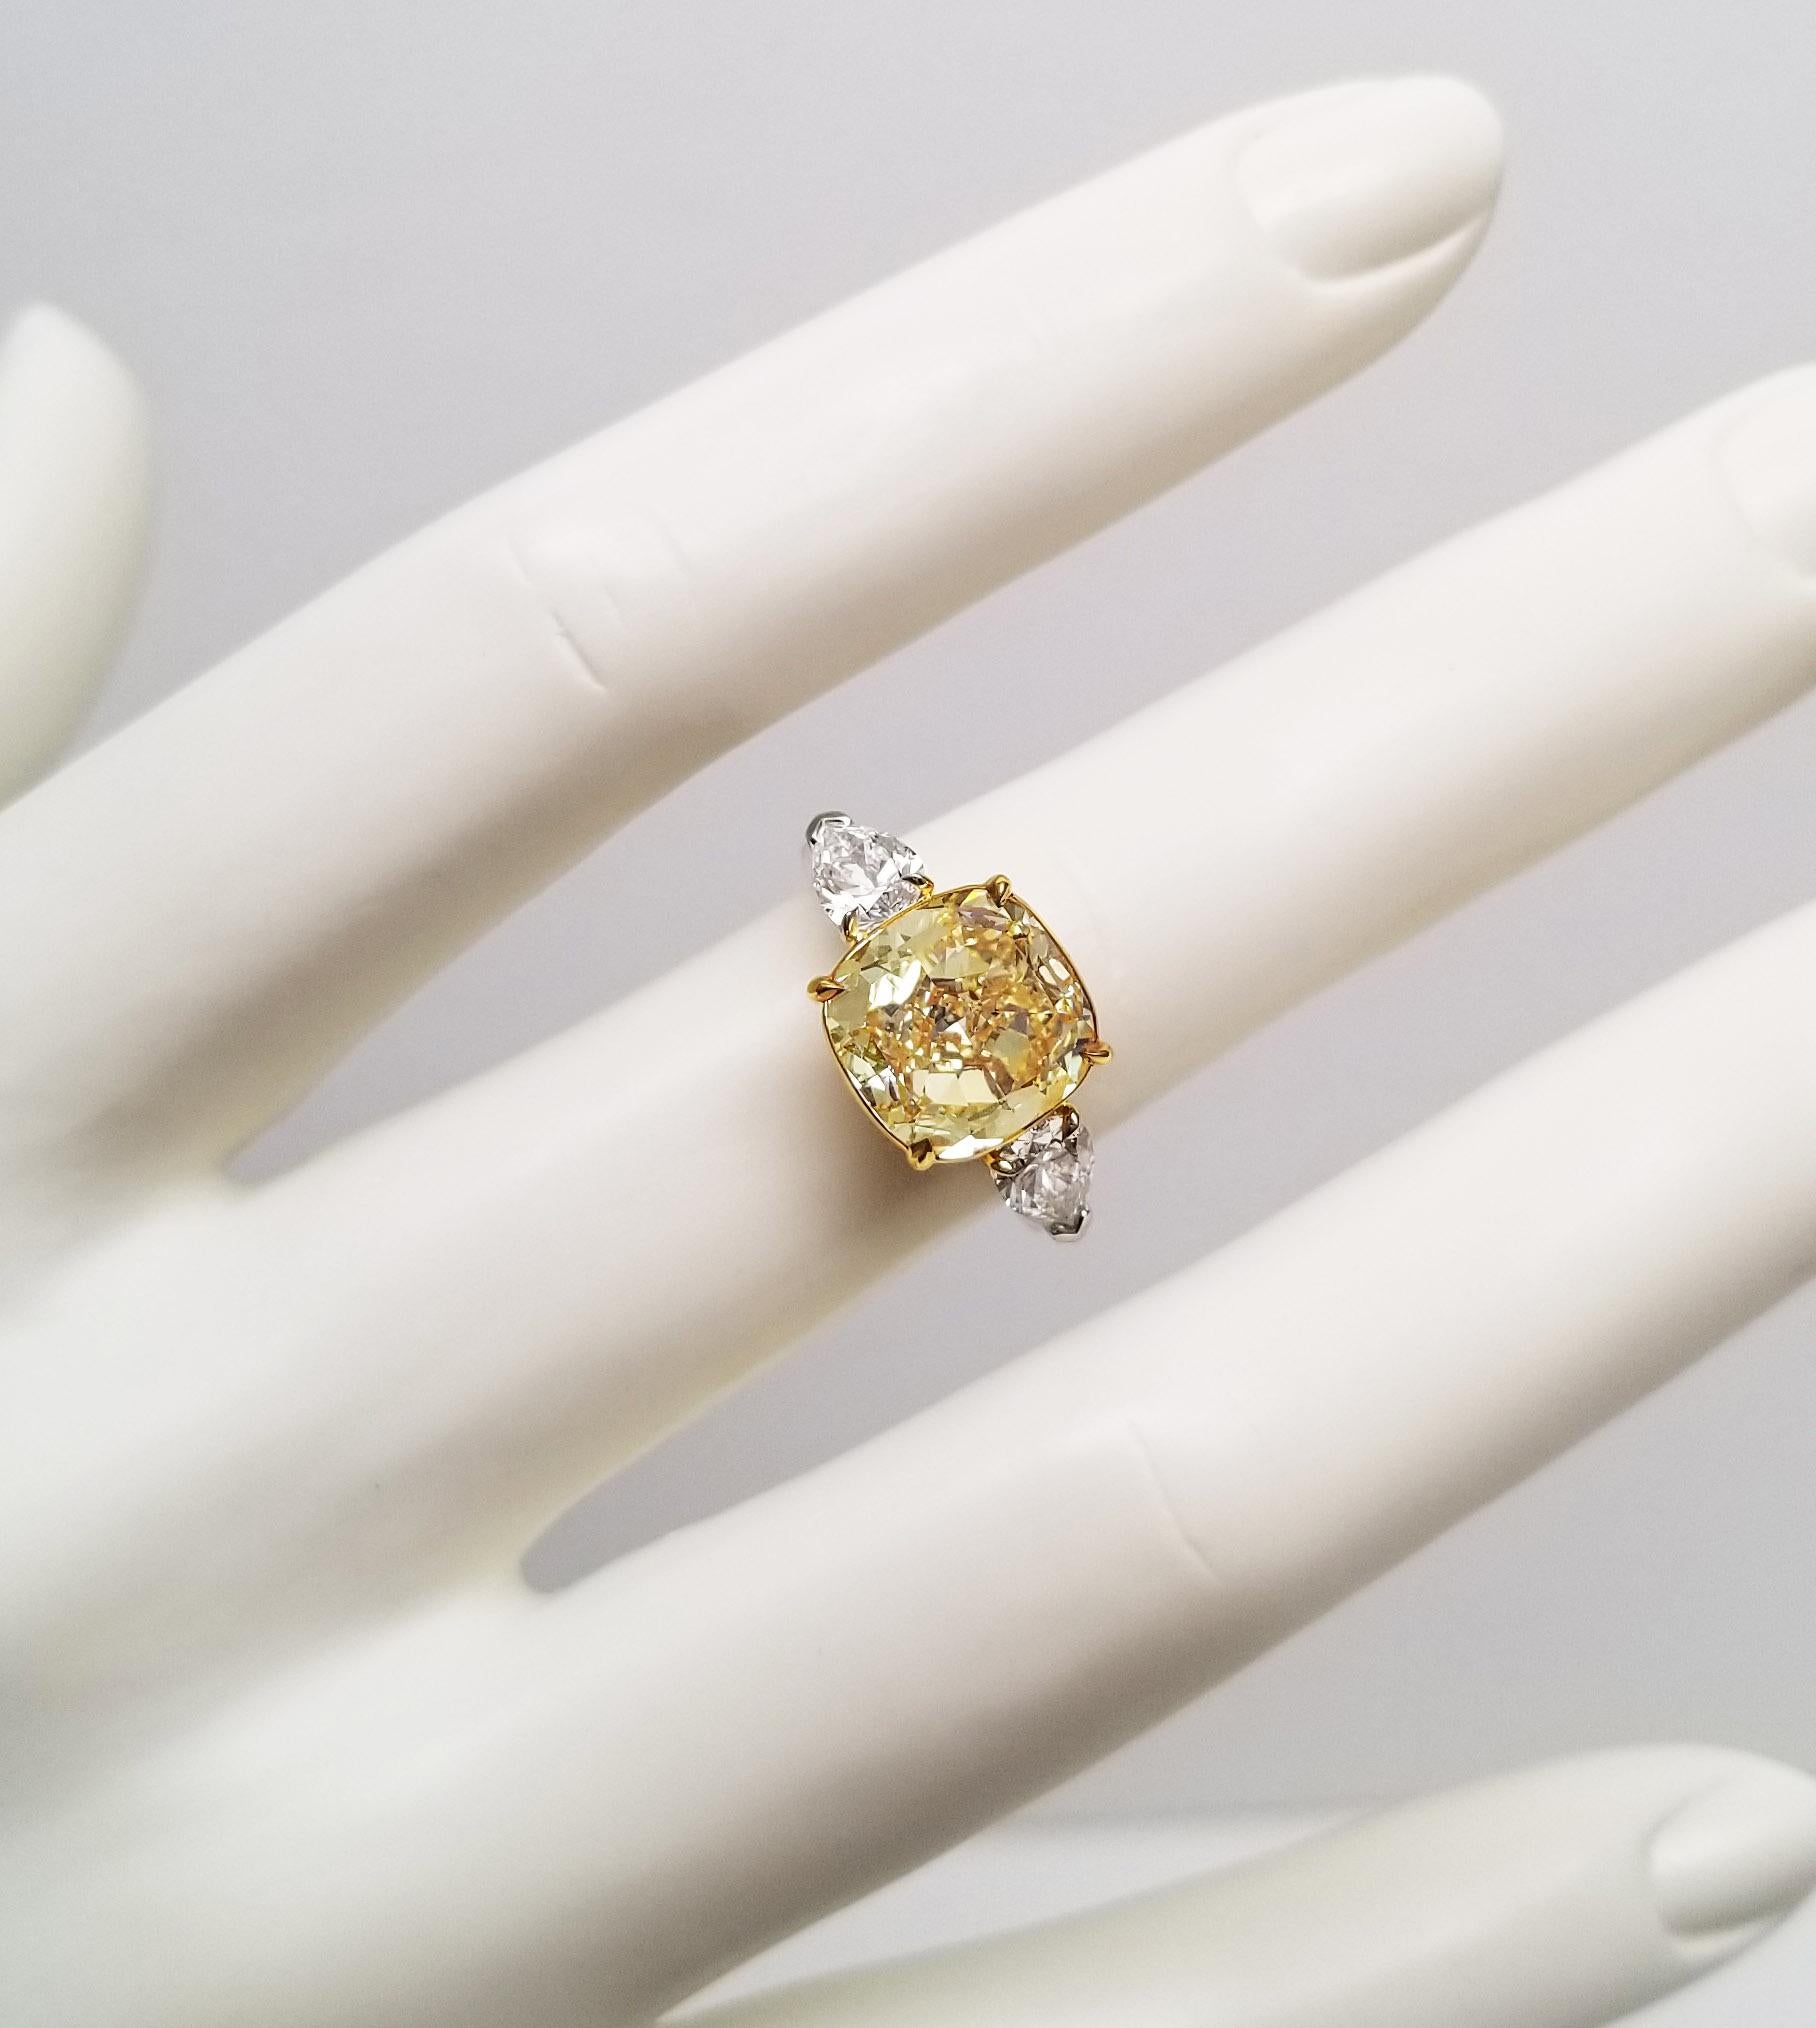 Contemporary Scarselli 5 Carat Fancy Yellow Diamond Engagement Ring For Sale